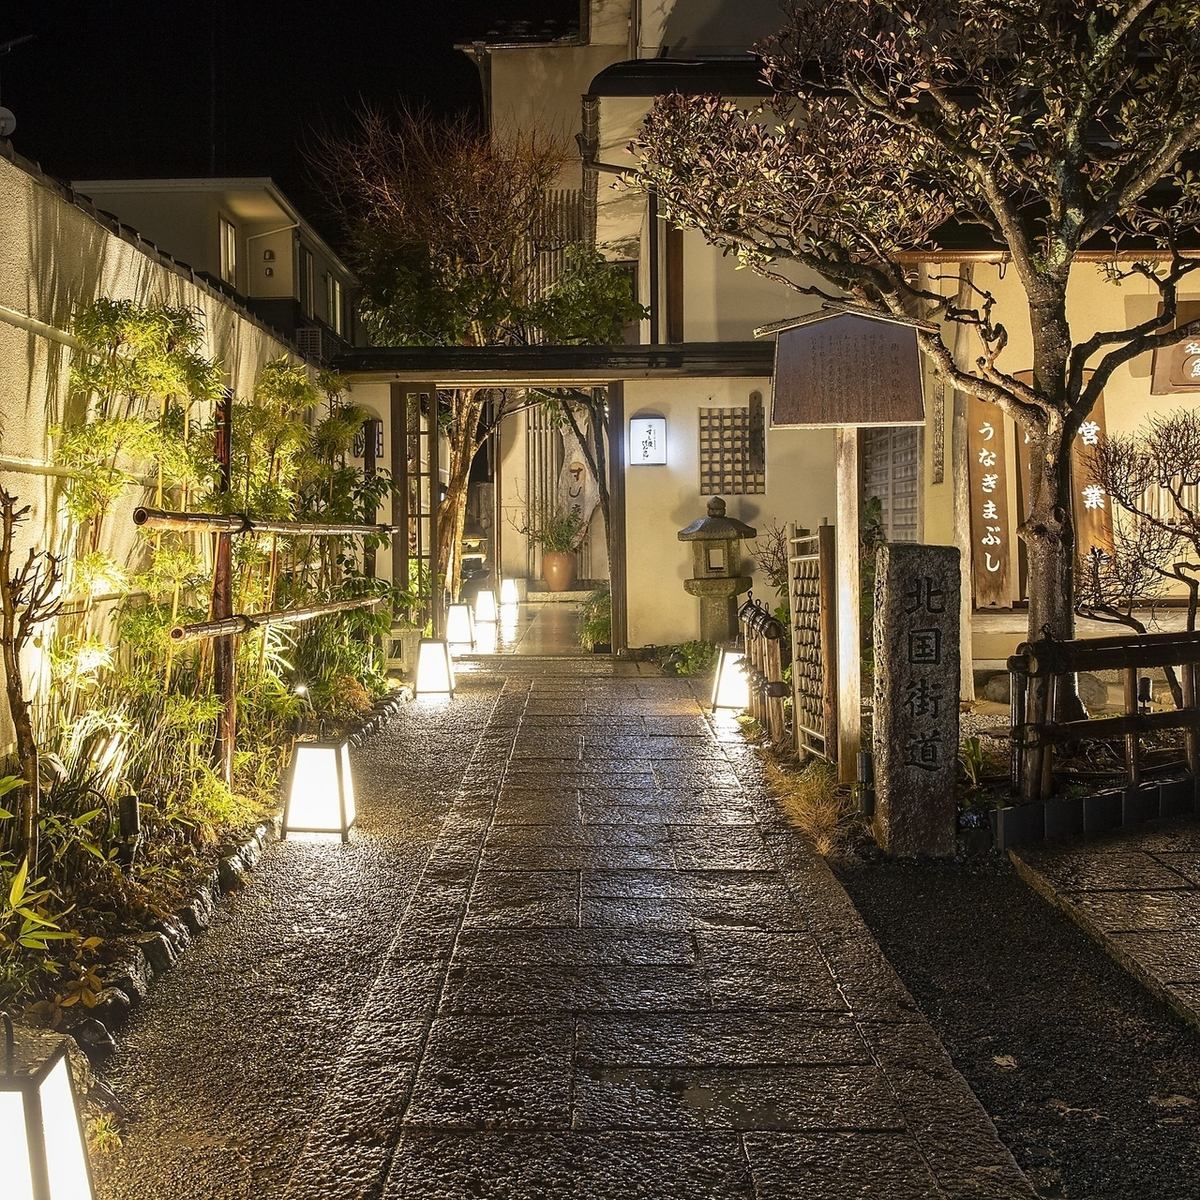 It's truly a restaurant.Enjoy a meal in a good old Japanese atmosphere from the courtyard.